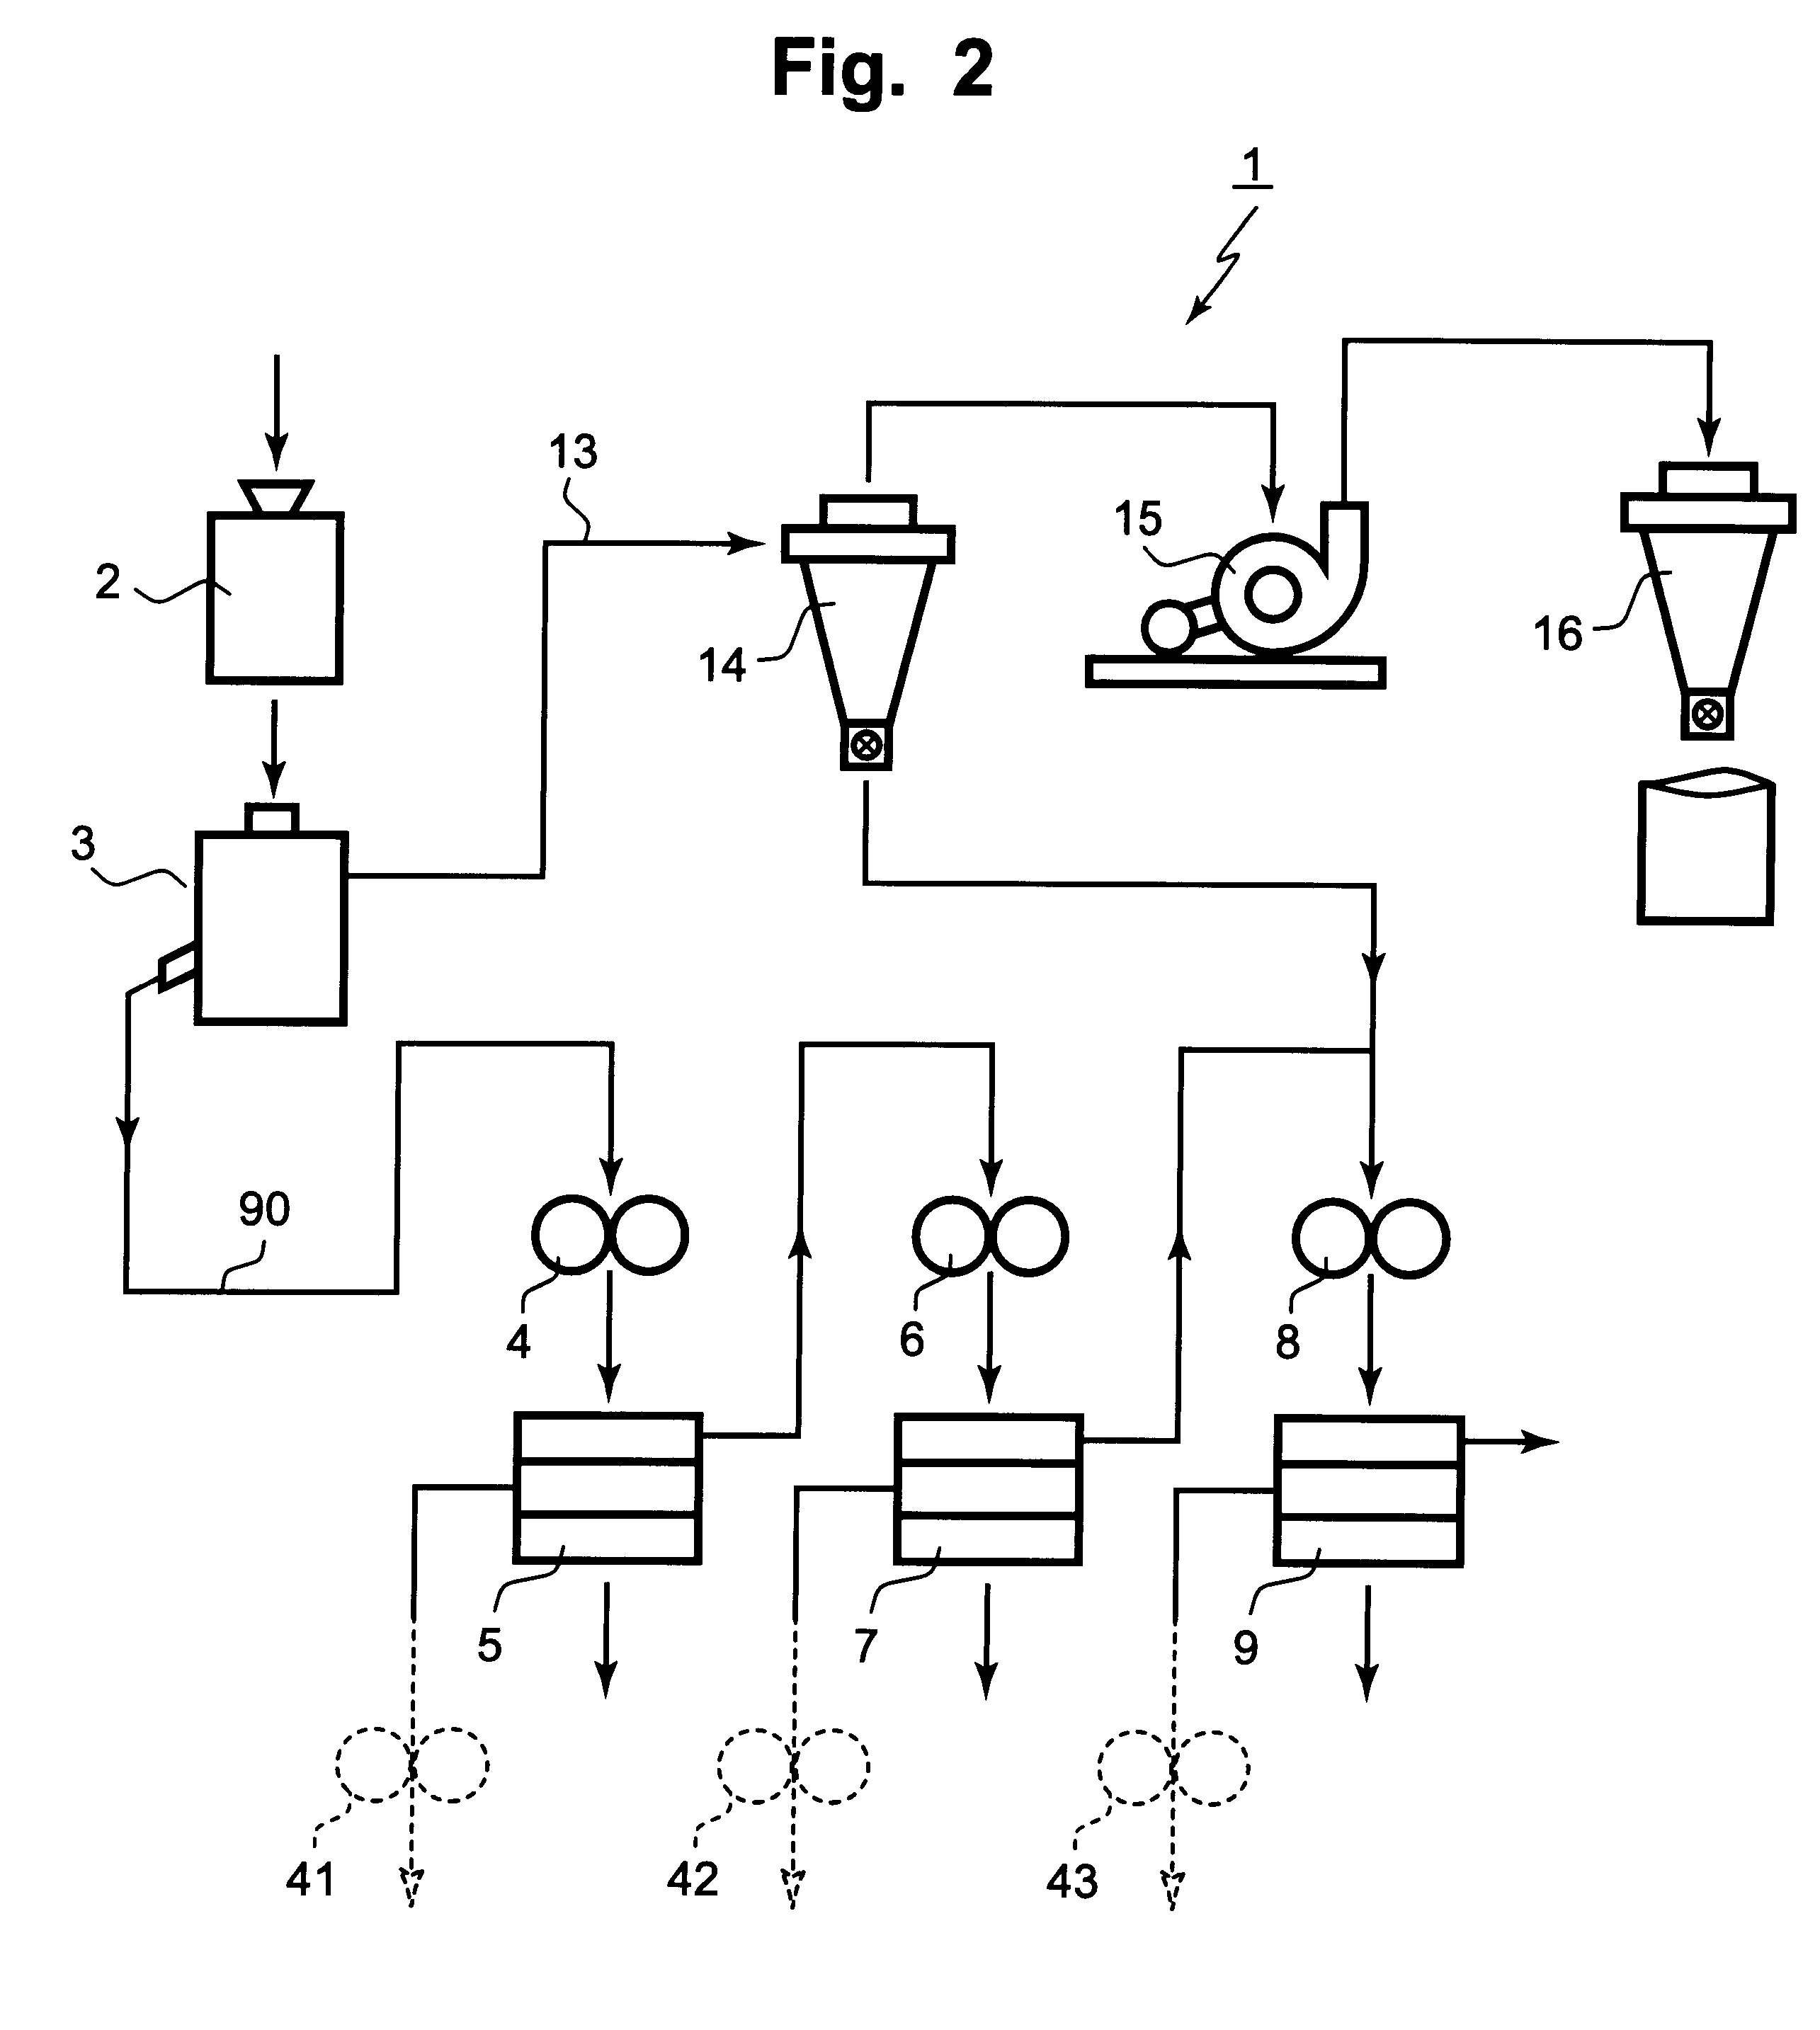 Flour milling method having a sorting step for raw wheat grains and flour milling system adopting the method